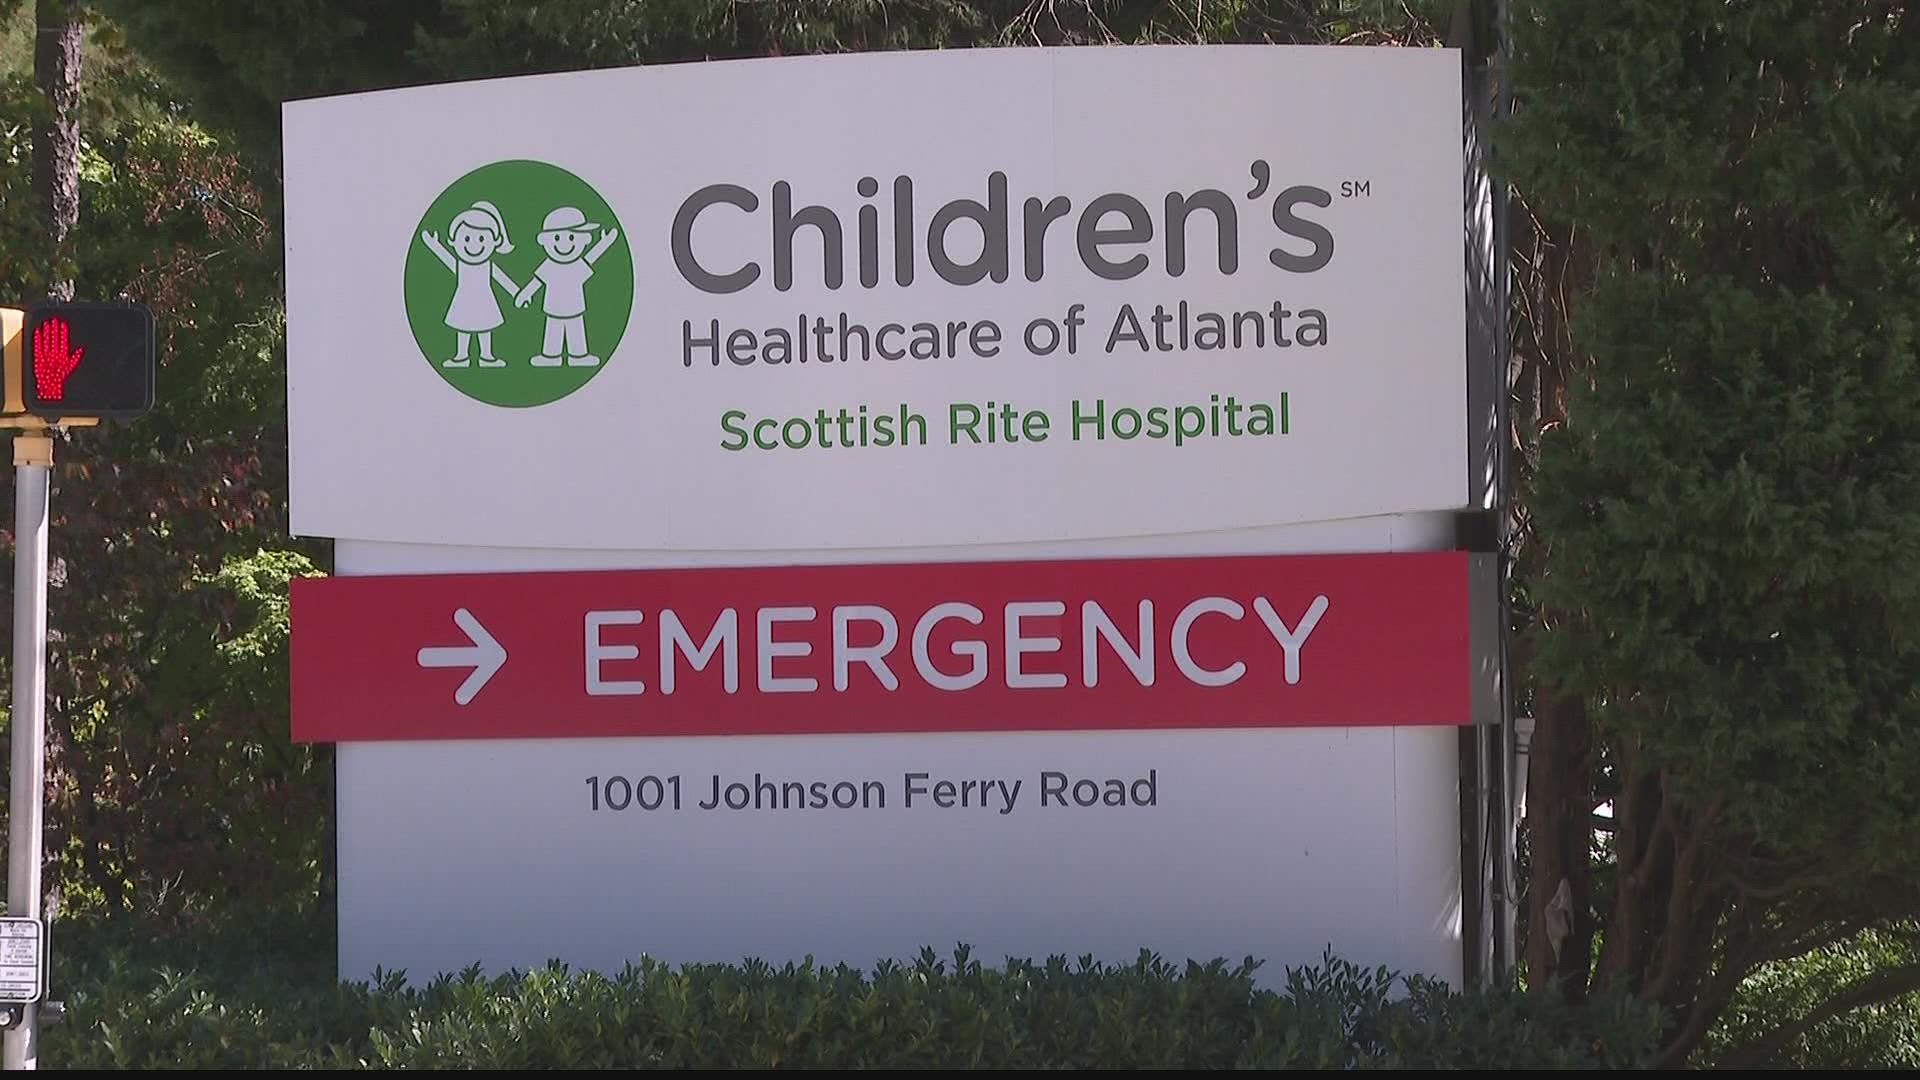 Emergency tents have been set up outside to mitigate wait times, and officials recommend staying home and contacting pediatrician under certain circumstances.